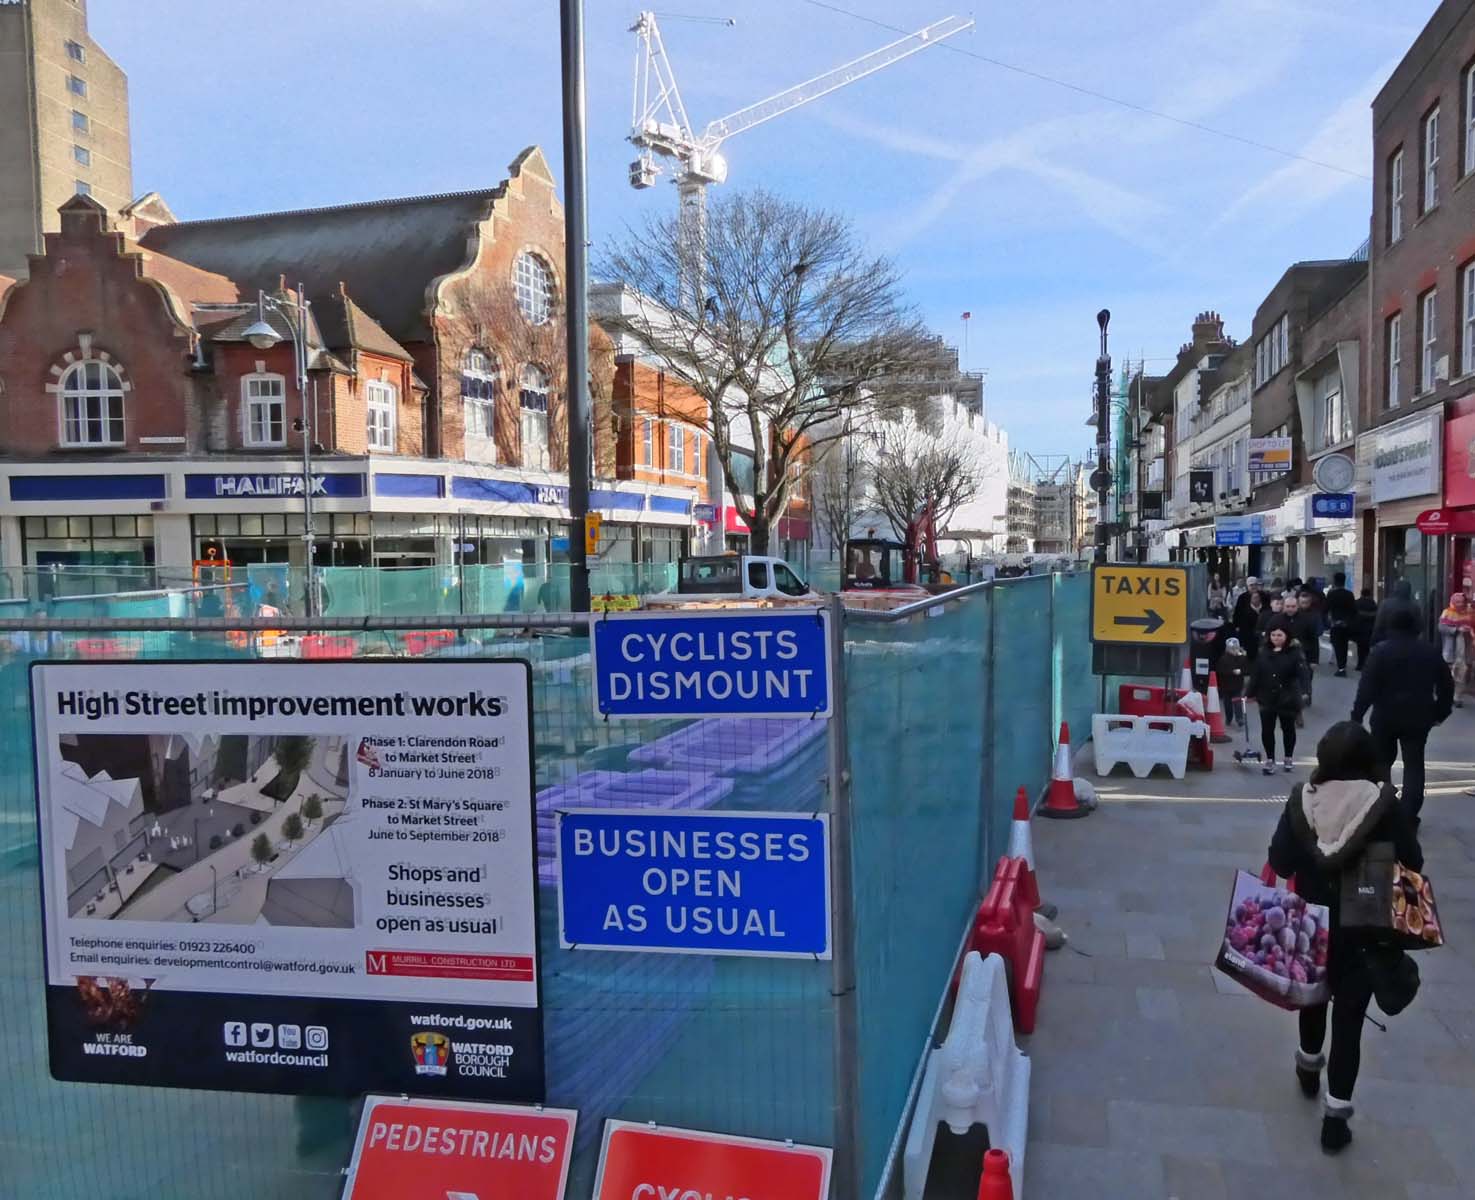 Watford High Street £2m improvement scheme to be closed to all vehicles